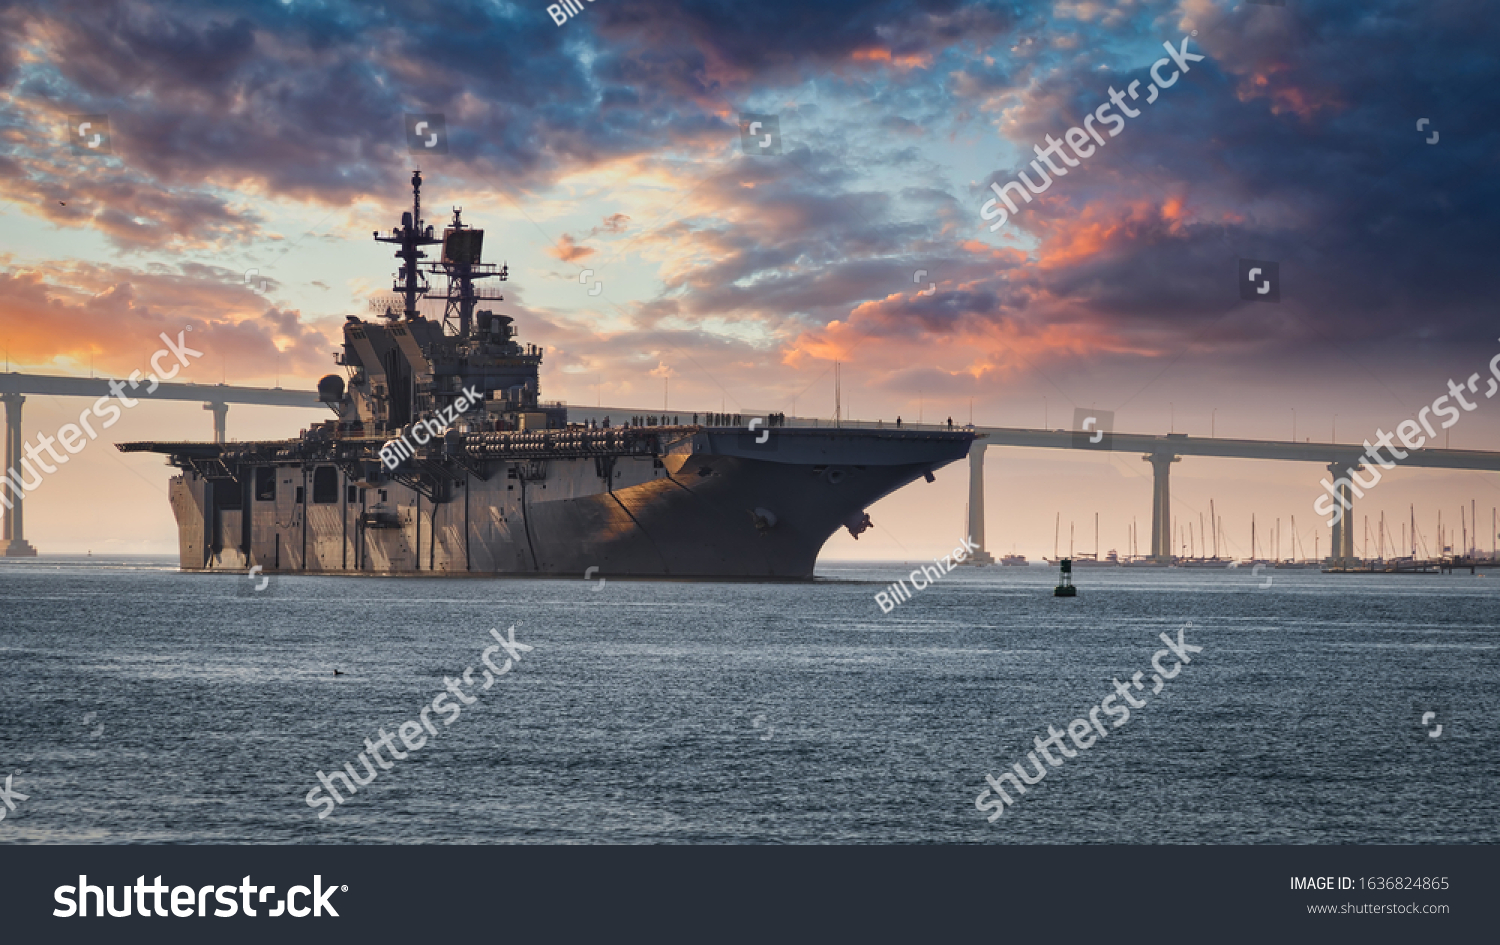 A US Navy ship departs San Diego Bay for the Pacific Ocean. #1636824865